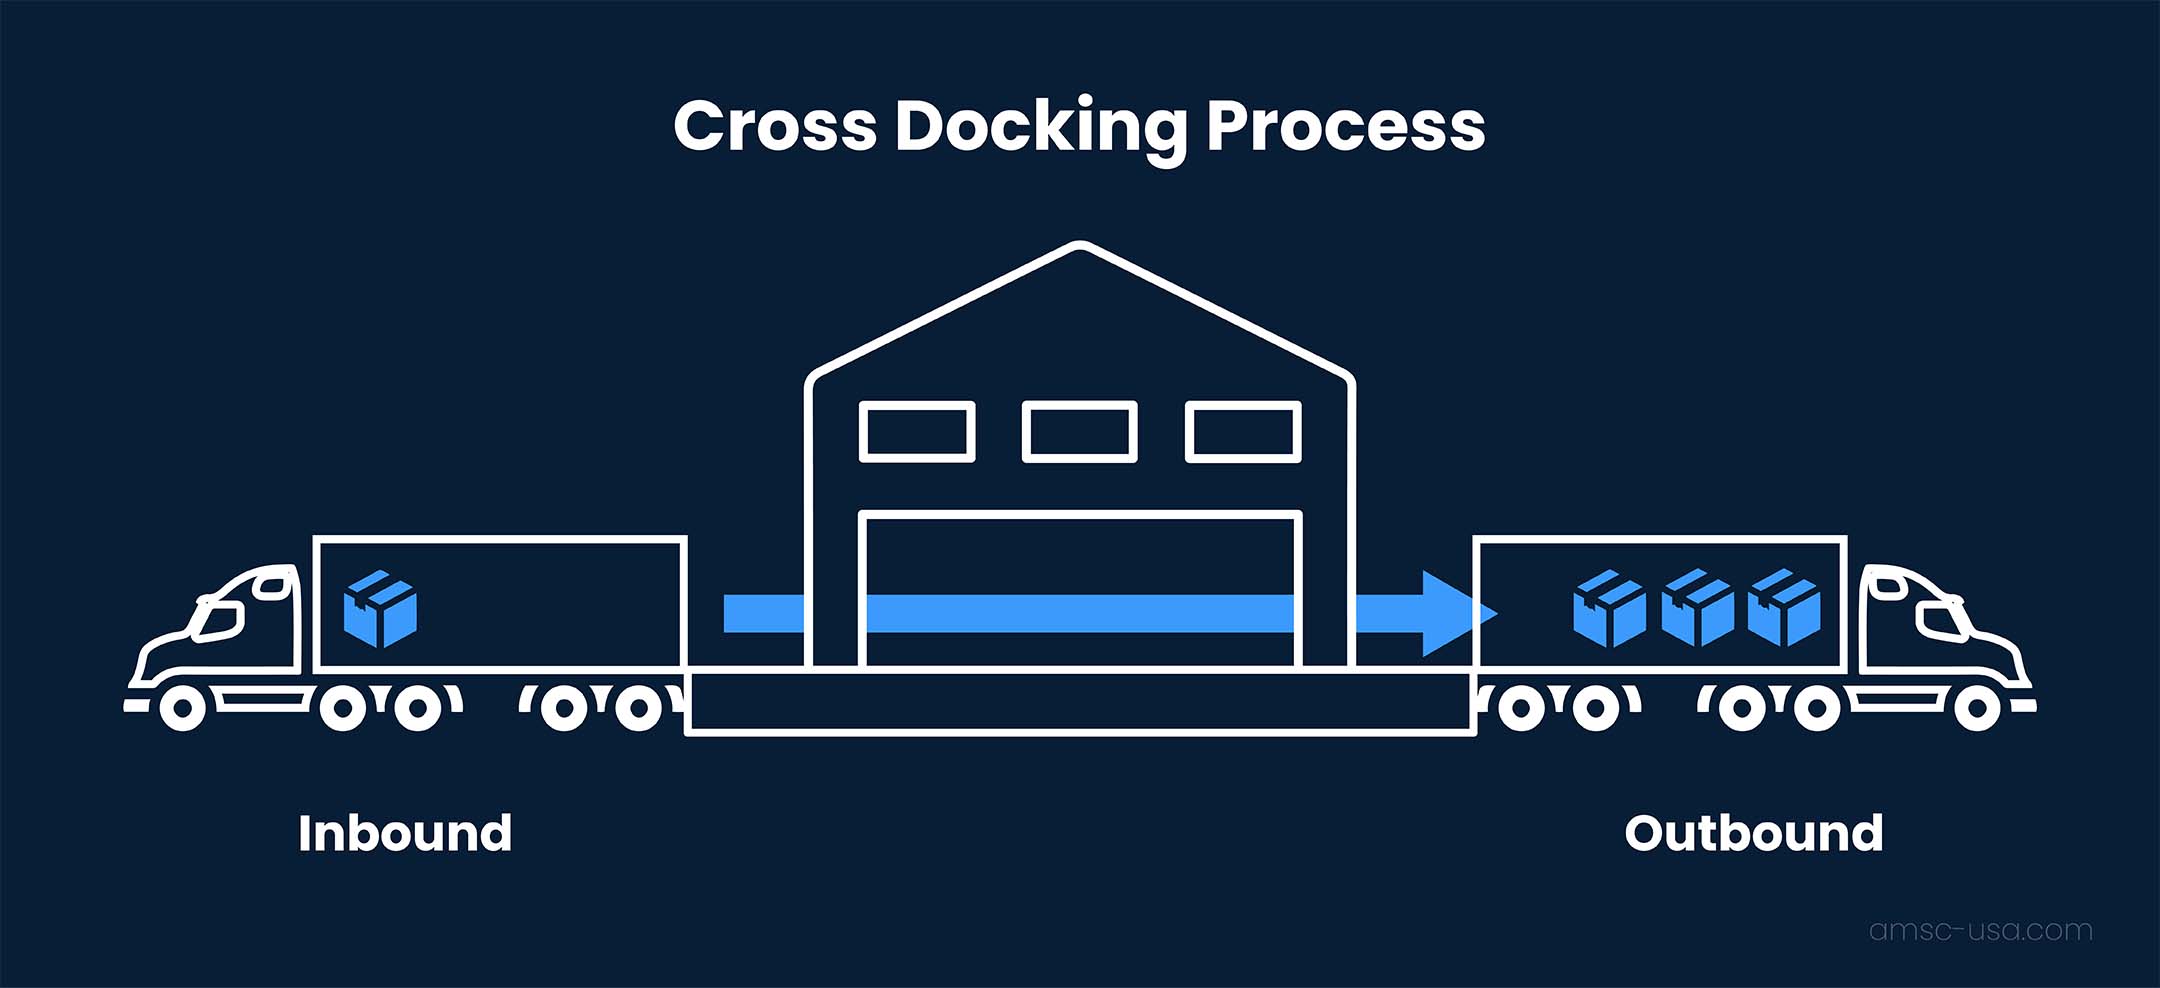 An illustration of the cross docking process